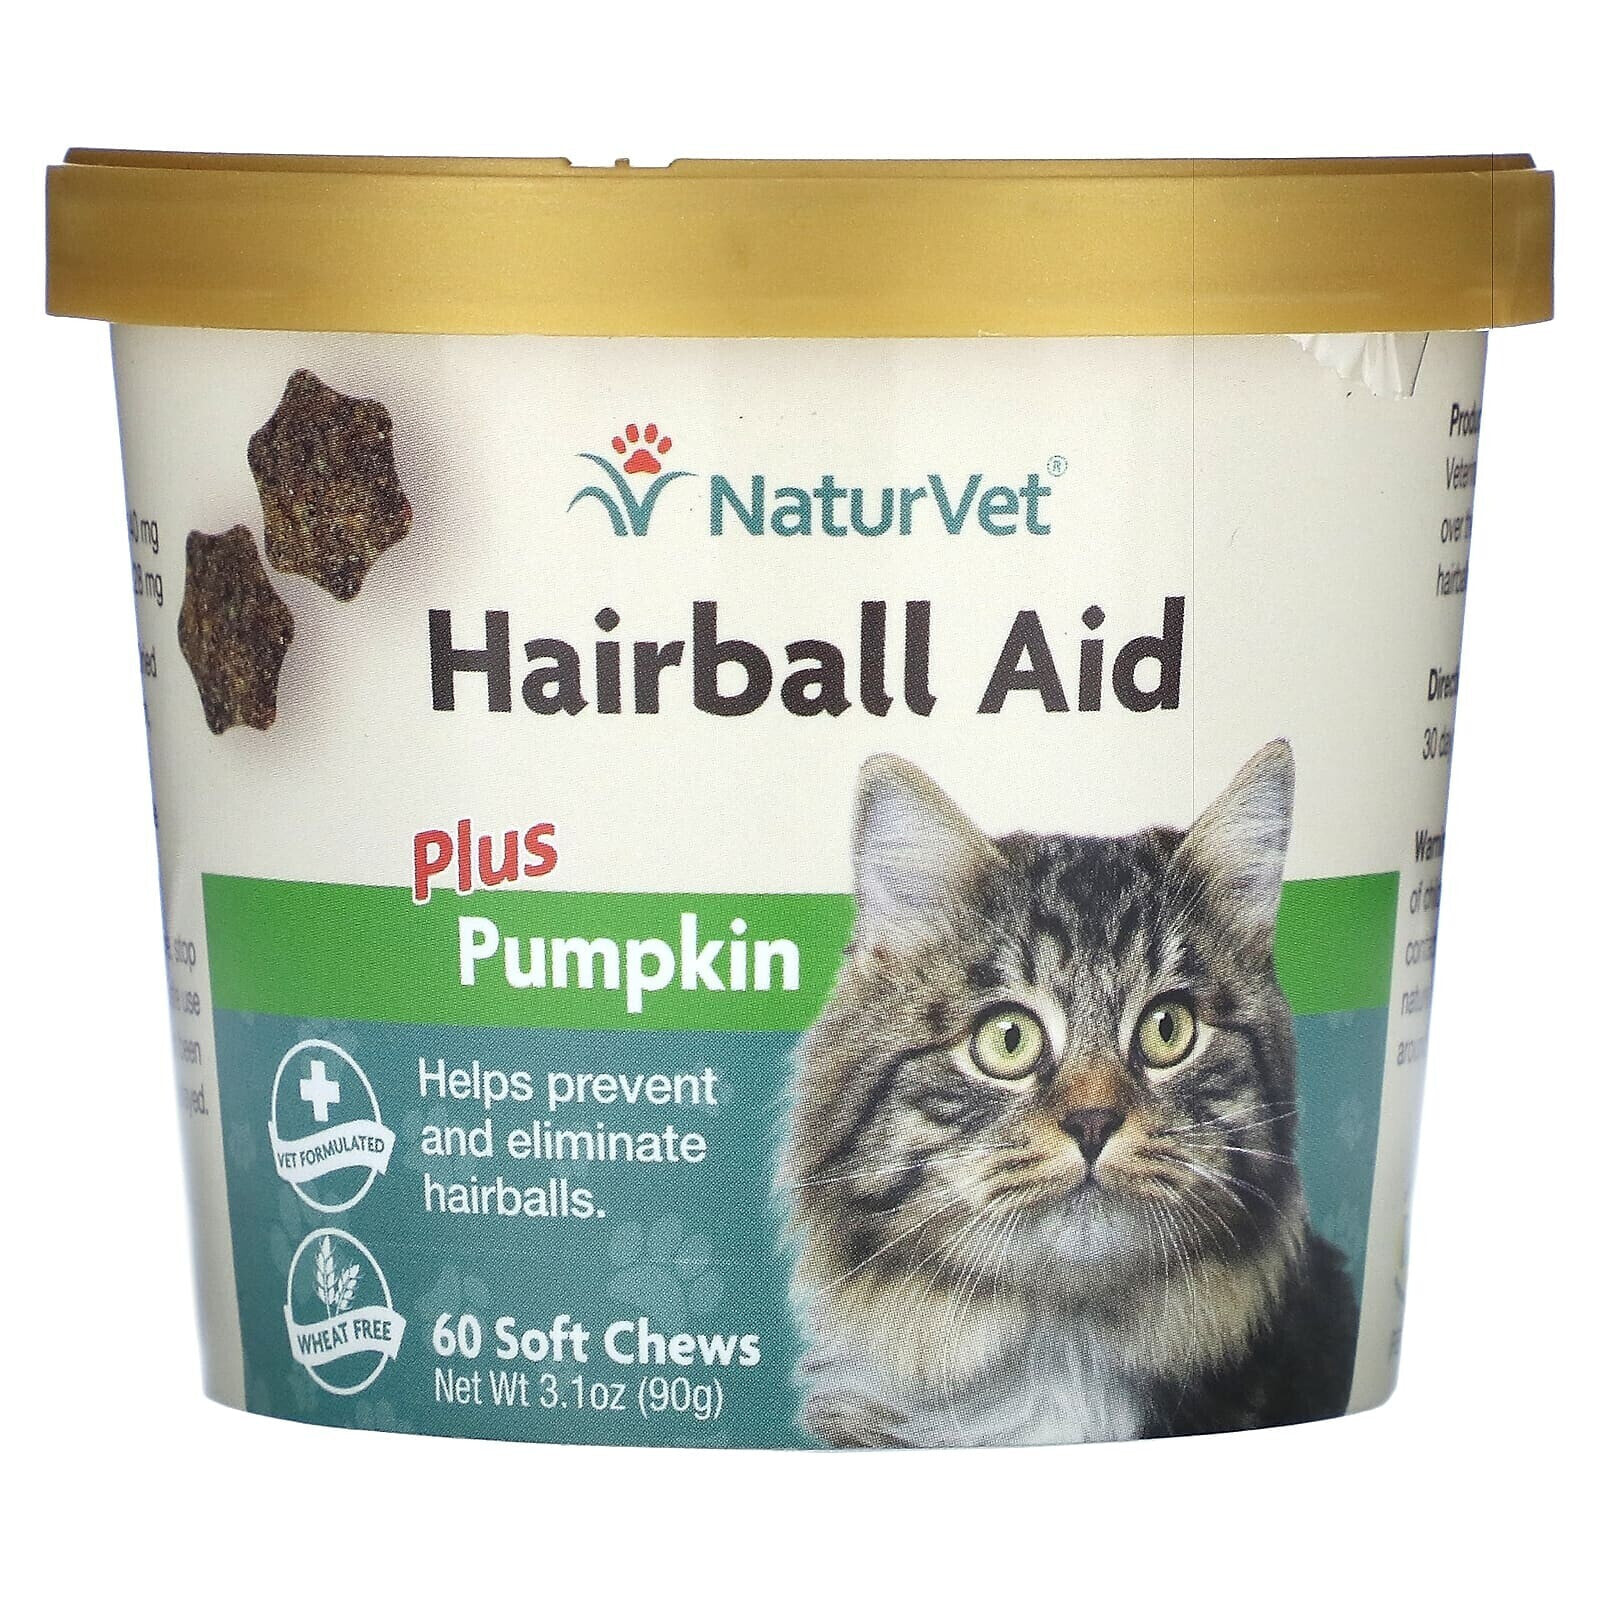 Hairball Aid Daily Support + Pumpkin, For Cats, 60 Soft Chews, 3.1 oz (90 g)